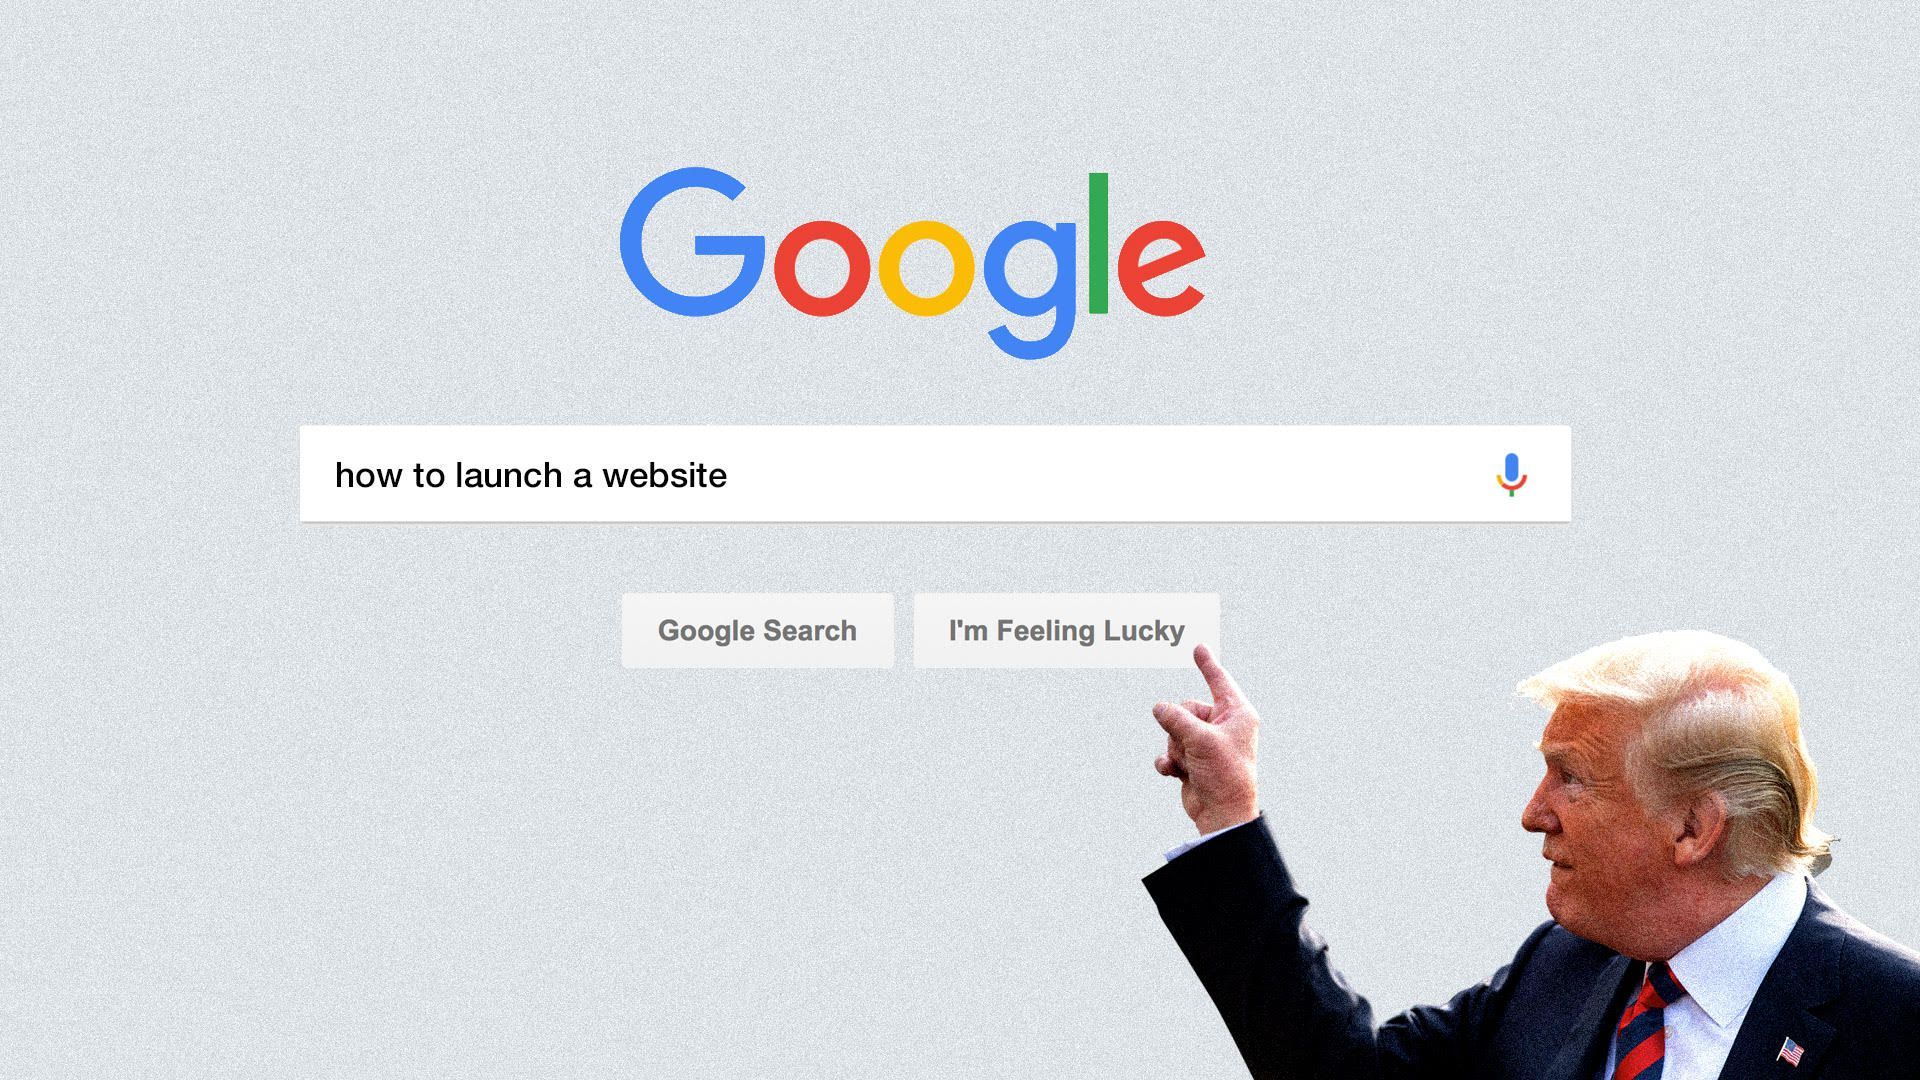 Illustration of President Trump pointing to a Google search box